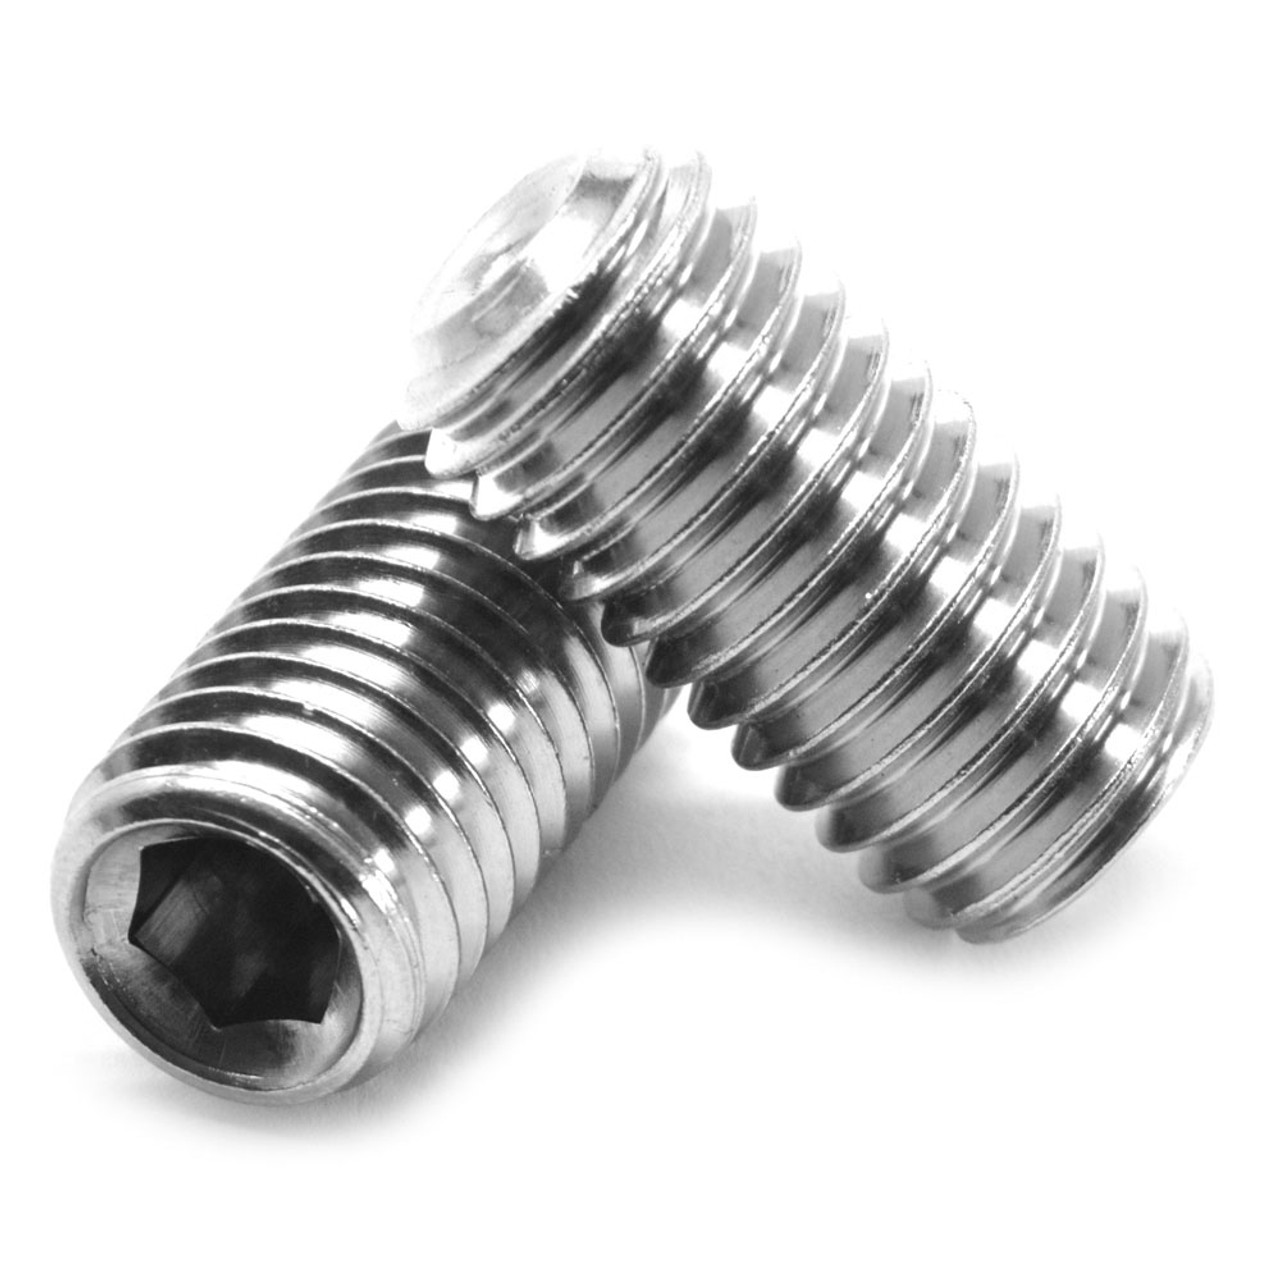 M10 x 1.50 x 50 MM Coarse Thread DIN 916 / ISO 4029 Socket Set Screw Cup Point Stainless Steel 18-8